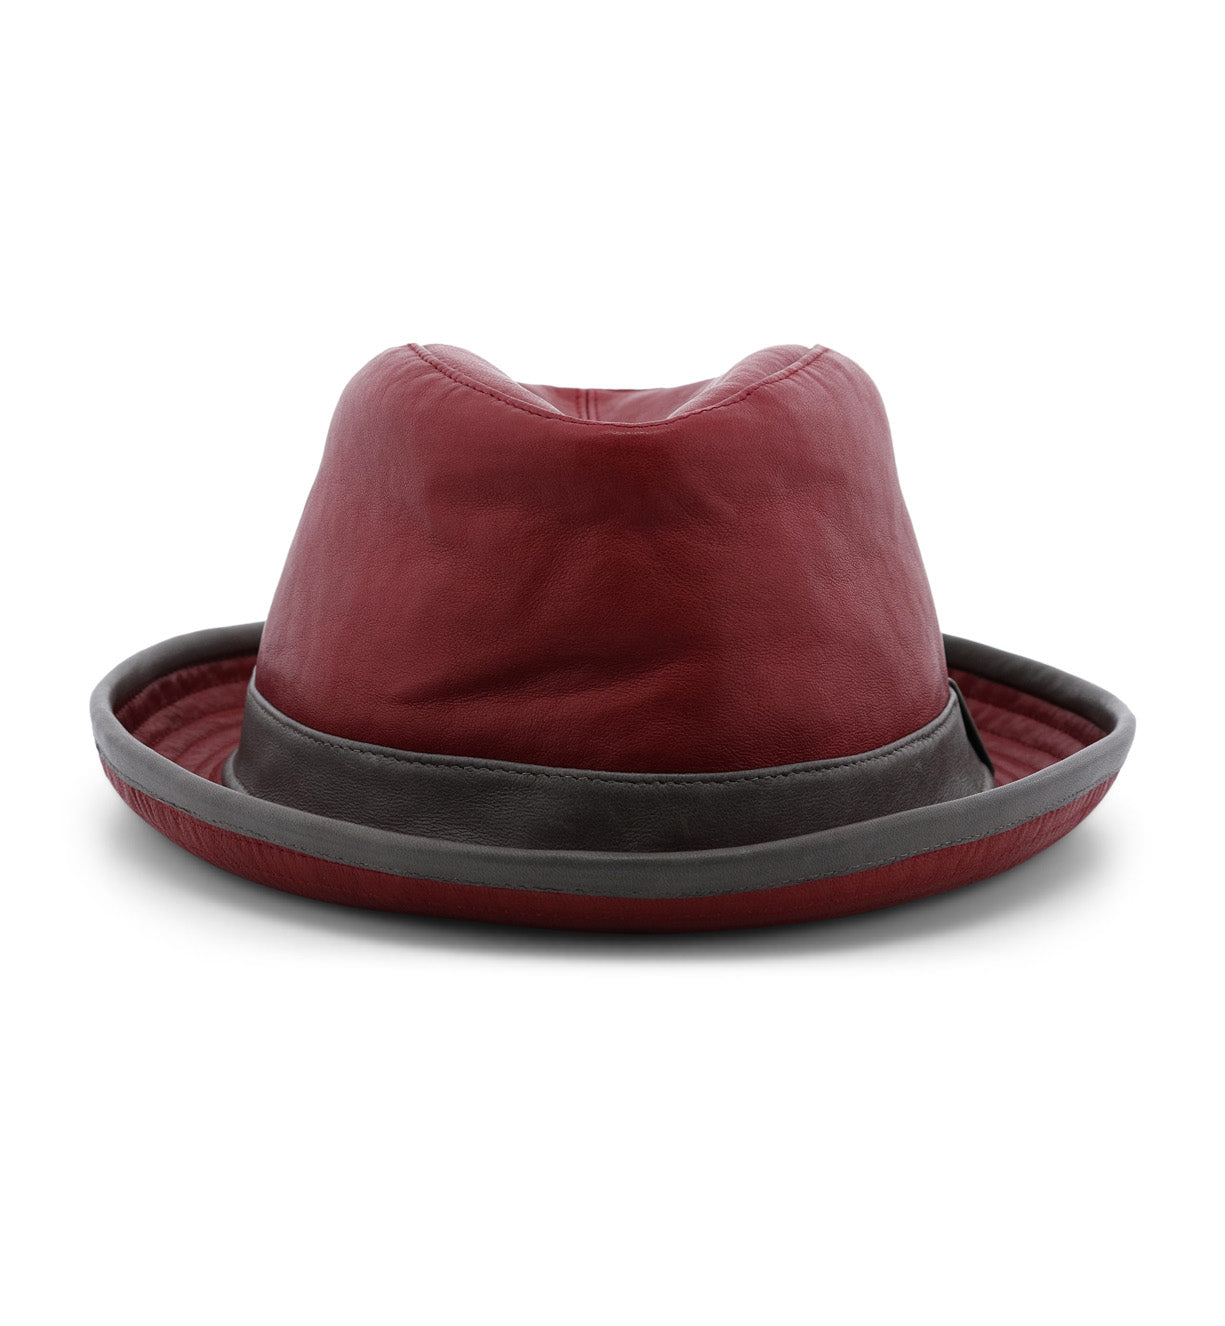 A Turino leather fedora by Bed Stu on a white background.